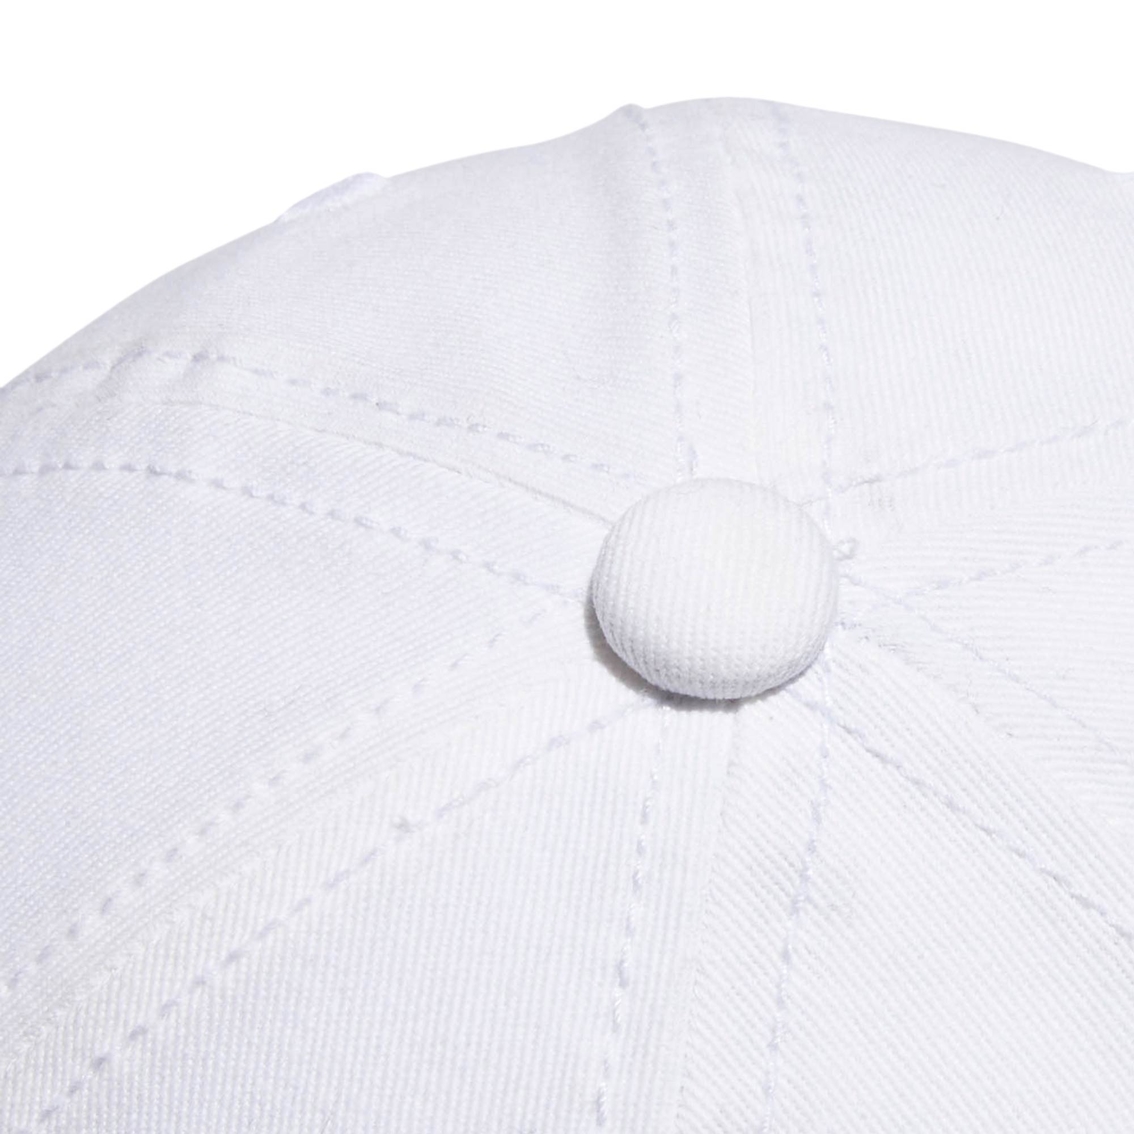 Adidas Originals Relaxed Strap Back Hat - Image 6 of 7